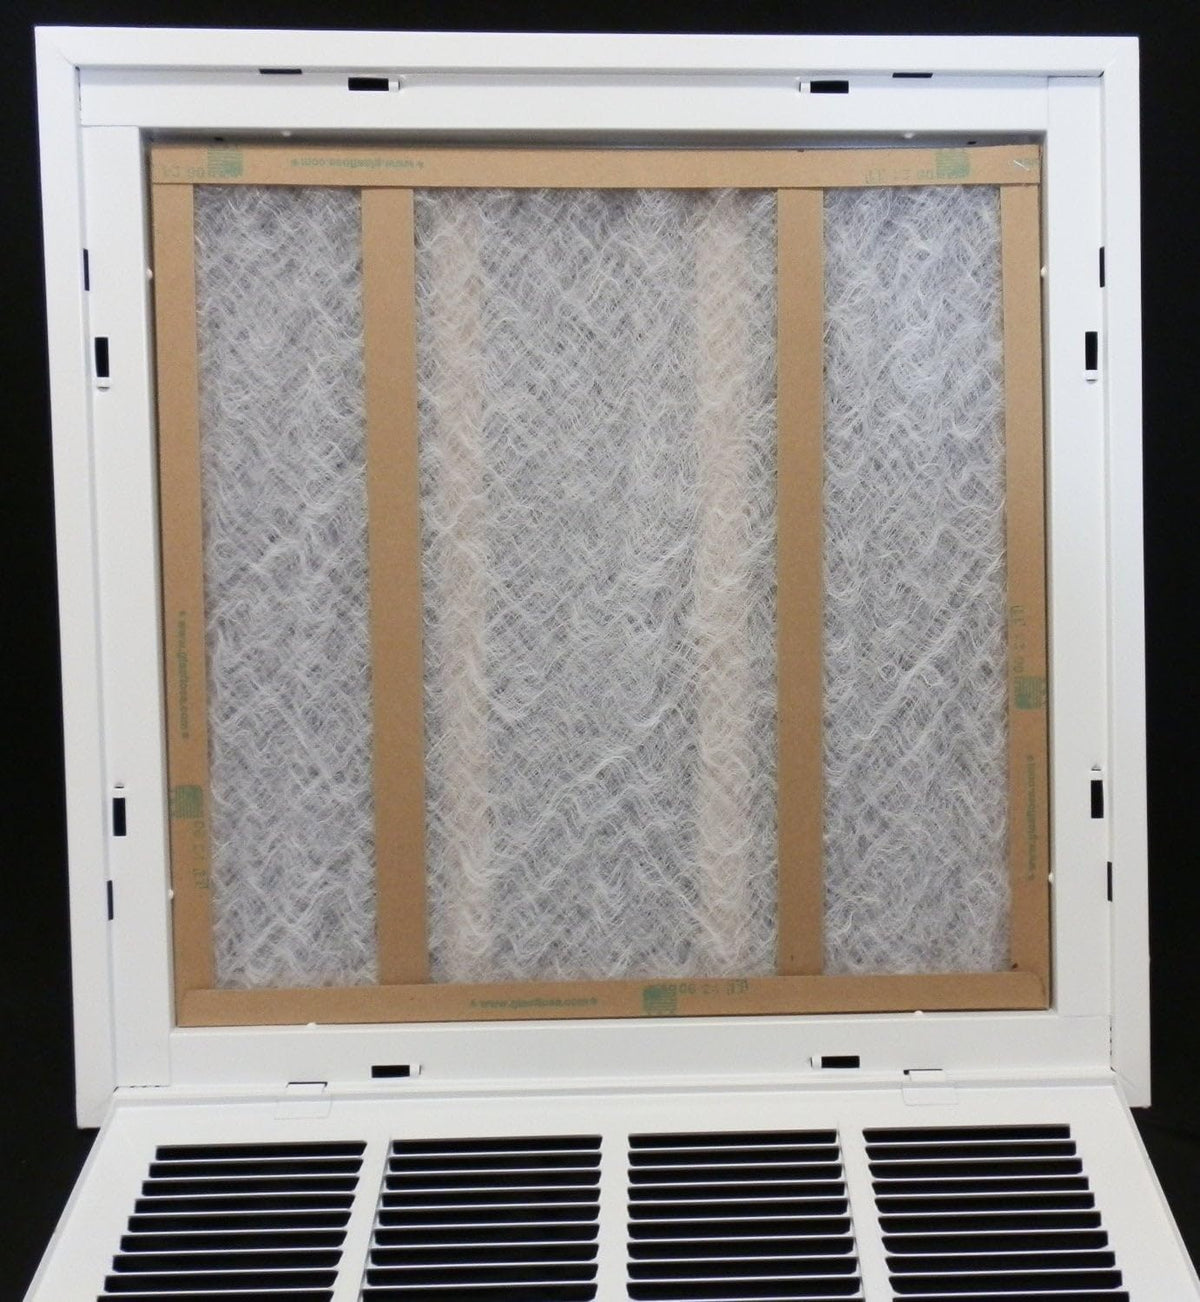 8&quot; X 28&quot; Steel Return Air Filter Grille for 1&quot; Filter - Removable Frame - [Outer Dimensions: 10 5/8&quot; X 30 5/8&quot;]